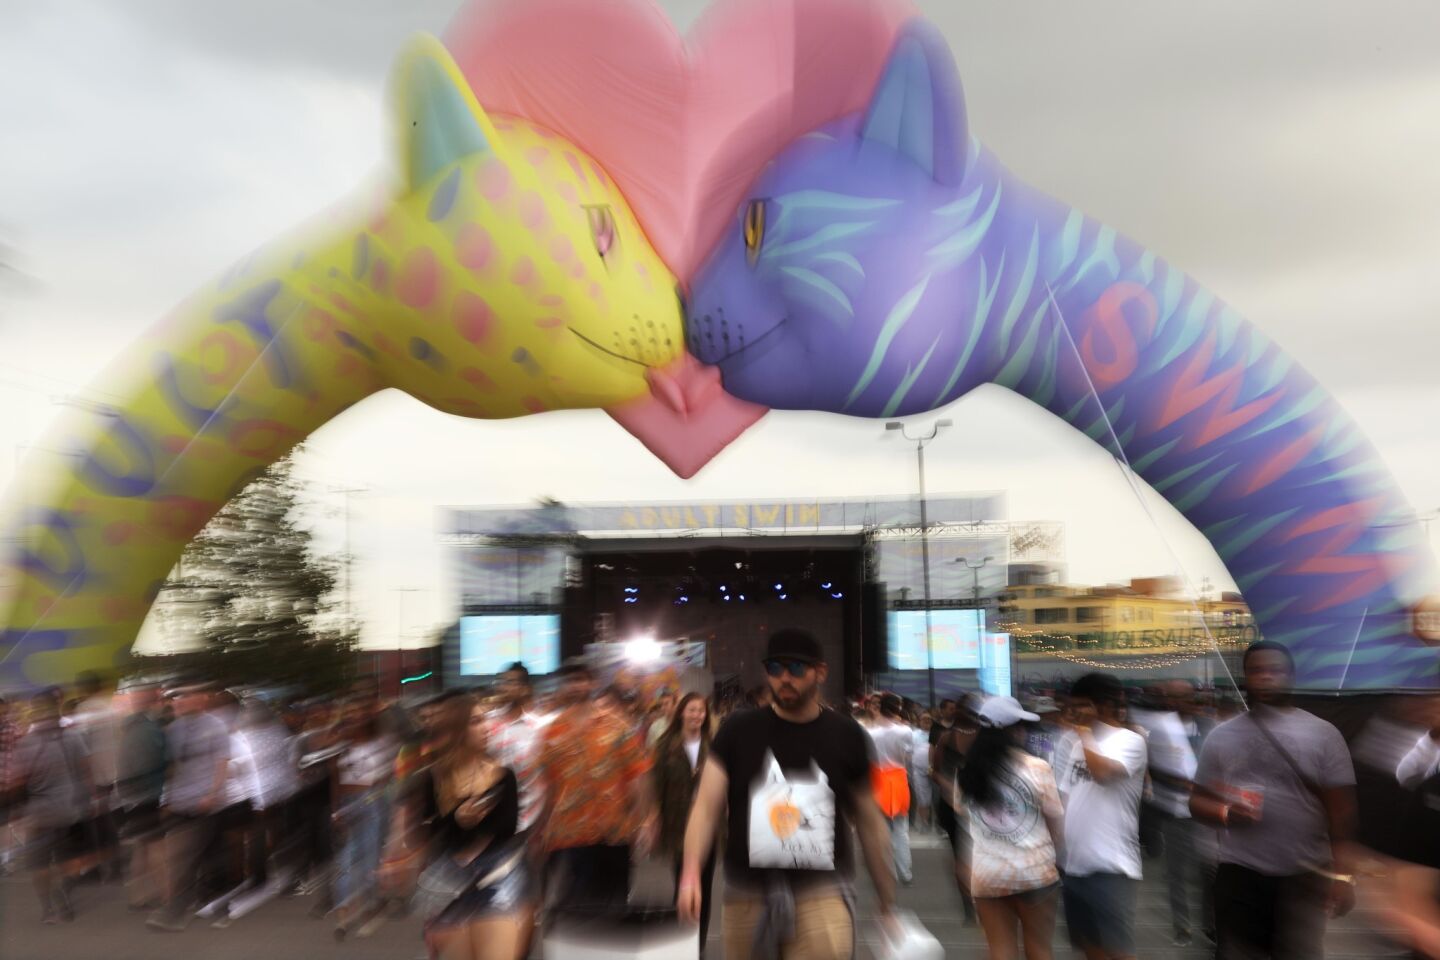 People attend the inaugural Adult Swim Festival at the Row in downtown Los Angeles on Oct. 6, 2018.